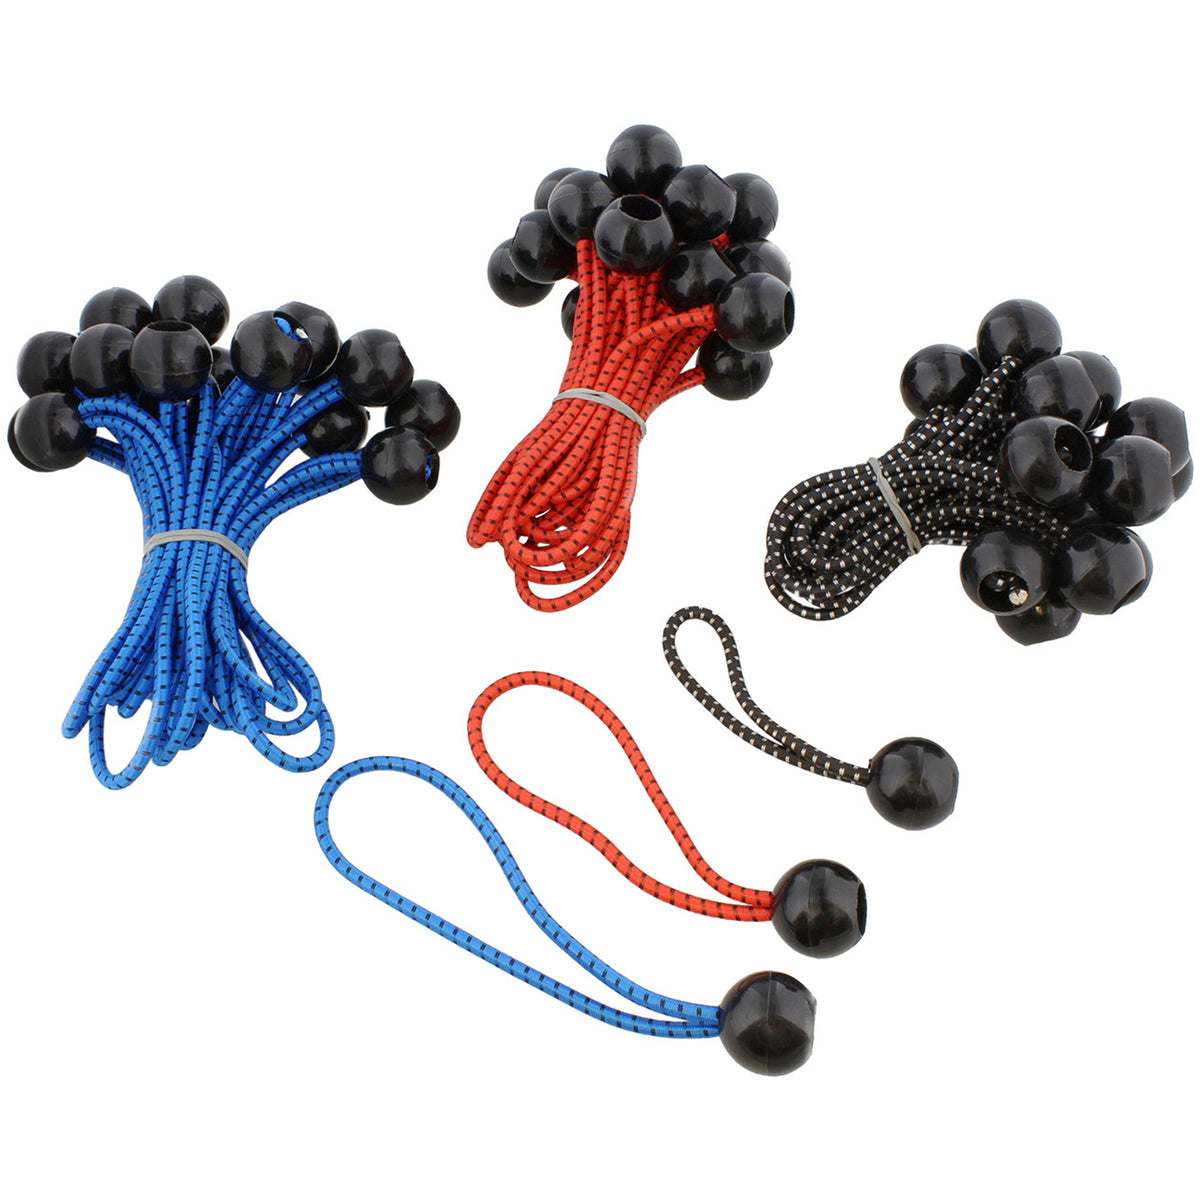 Ball Bungee Cords Assorted Sizes - 60pk Elastic Bungee Cords and Balls